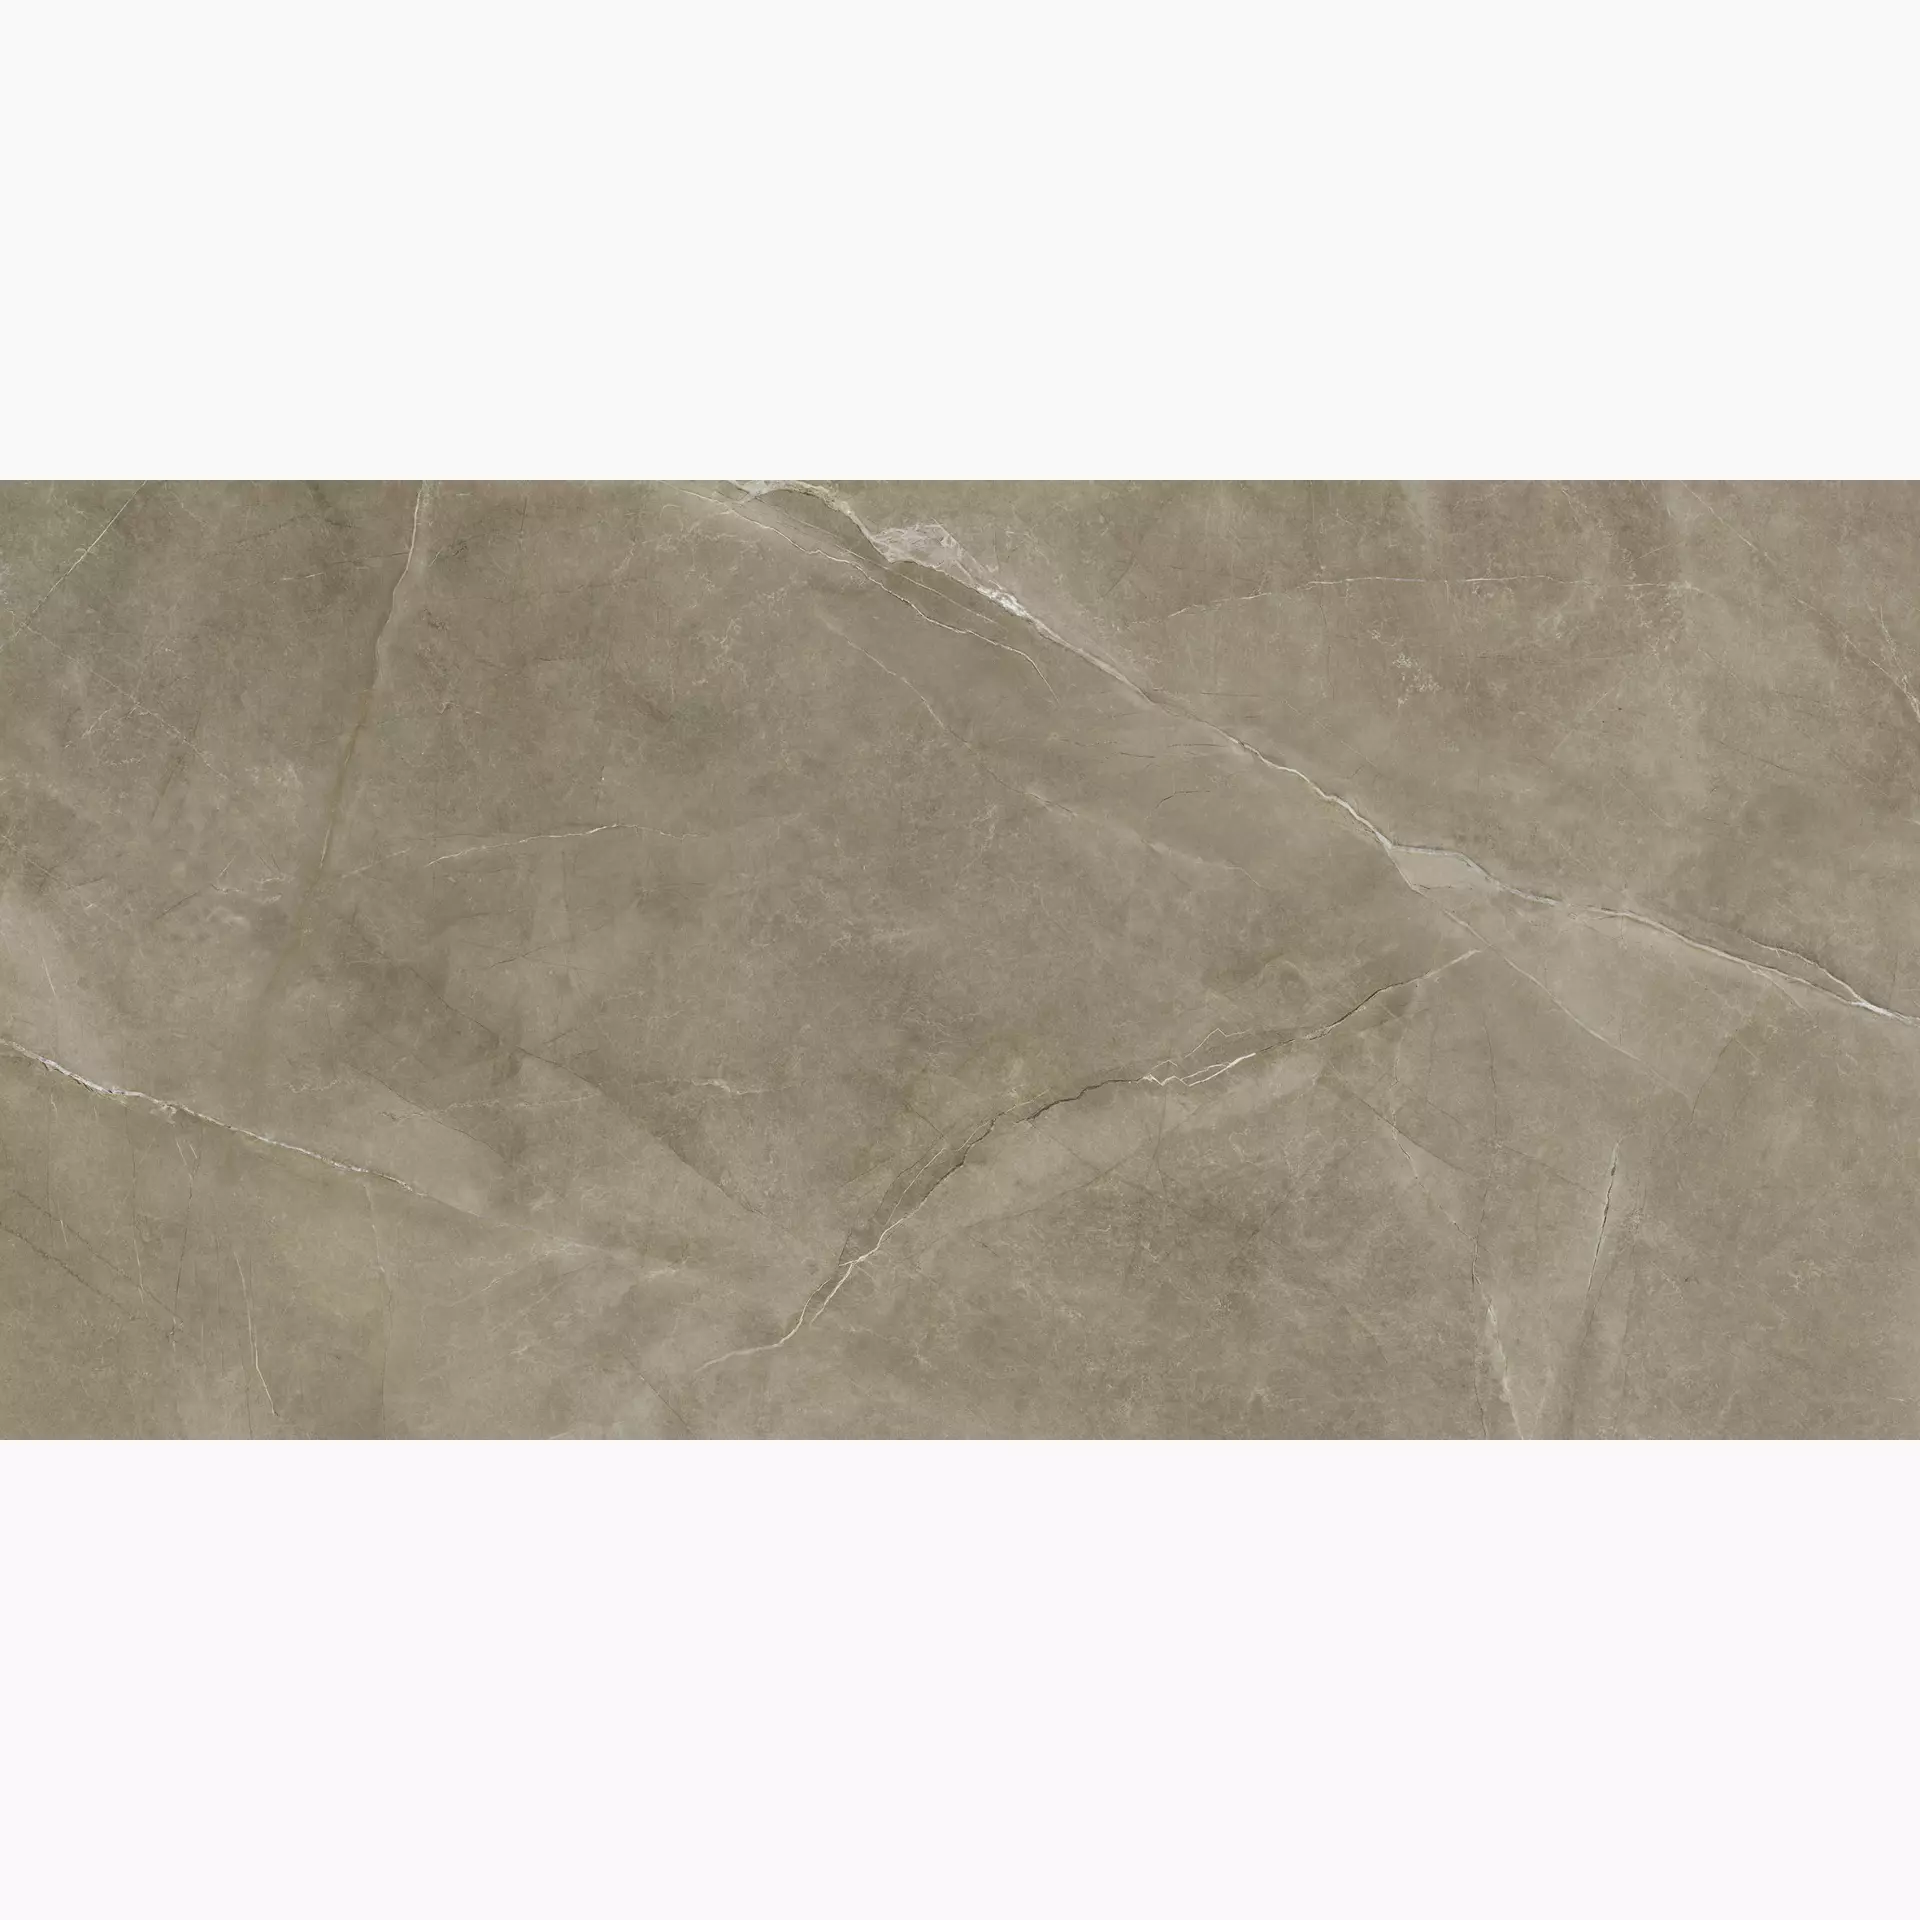 MGM Lux Taupe Levigato LUXTAULEV6012 60x120cm rectified 10mm